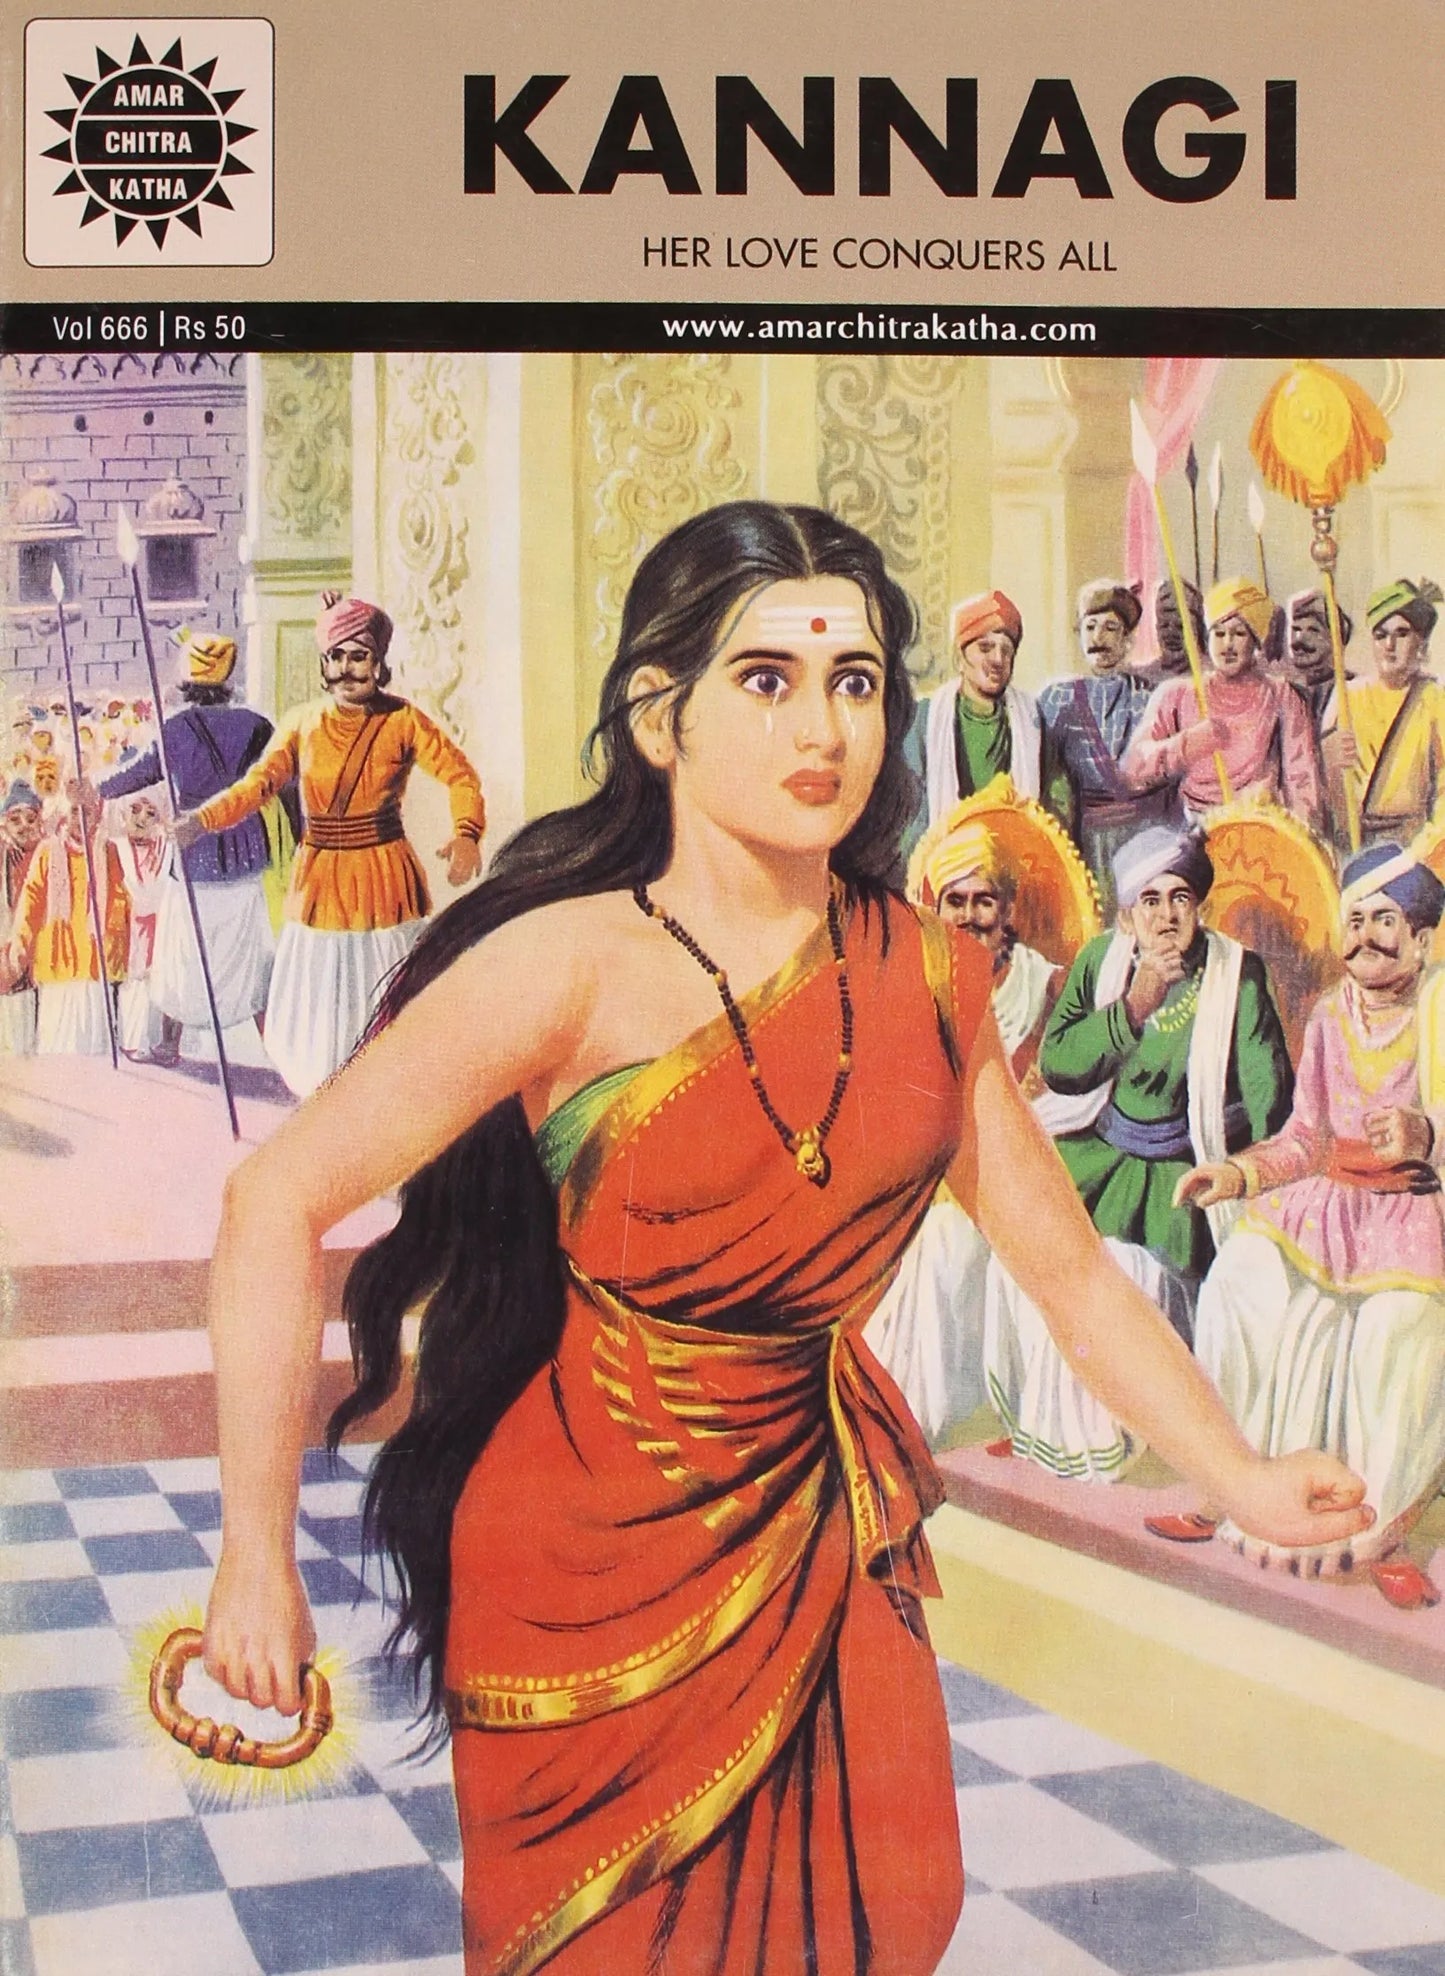 Amar Chitra Katha -Kannagi - Based On A Great Tamil Classic - Her Love Conquers All